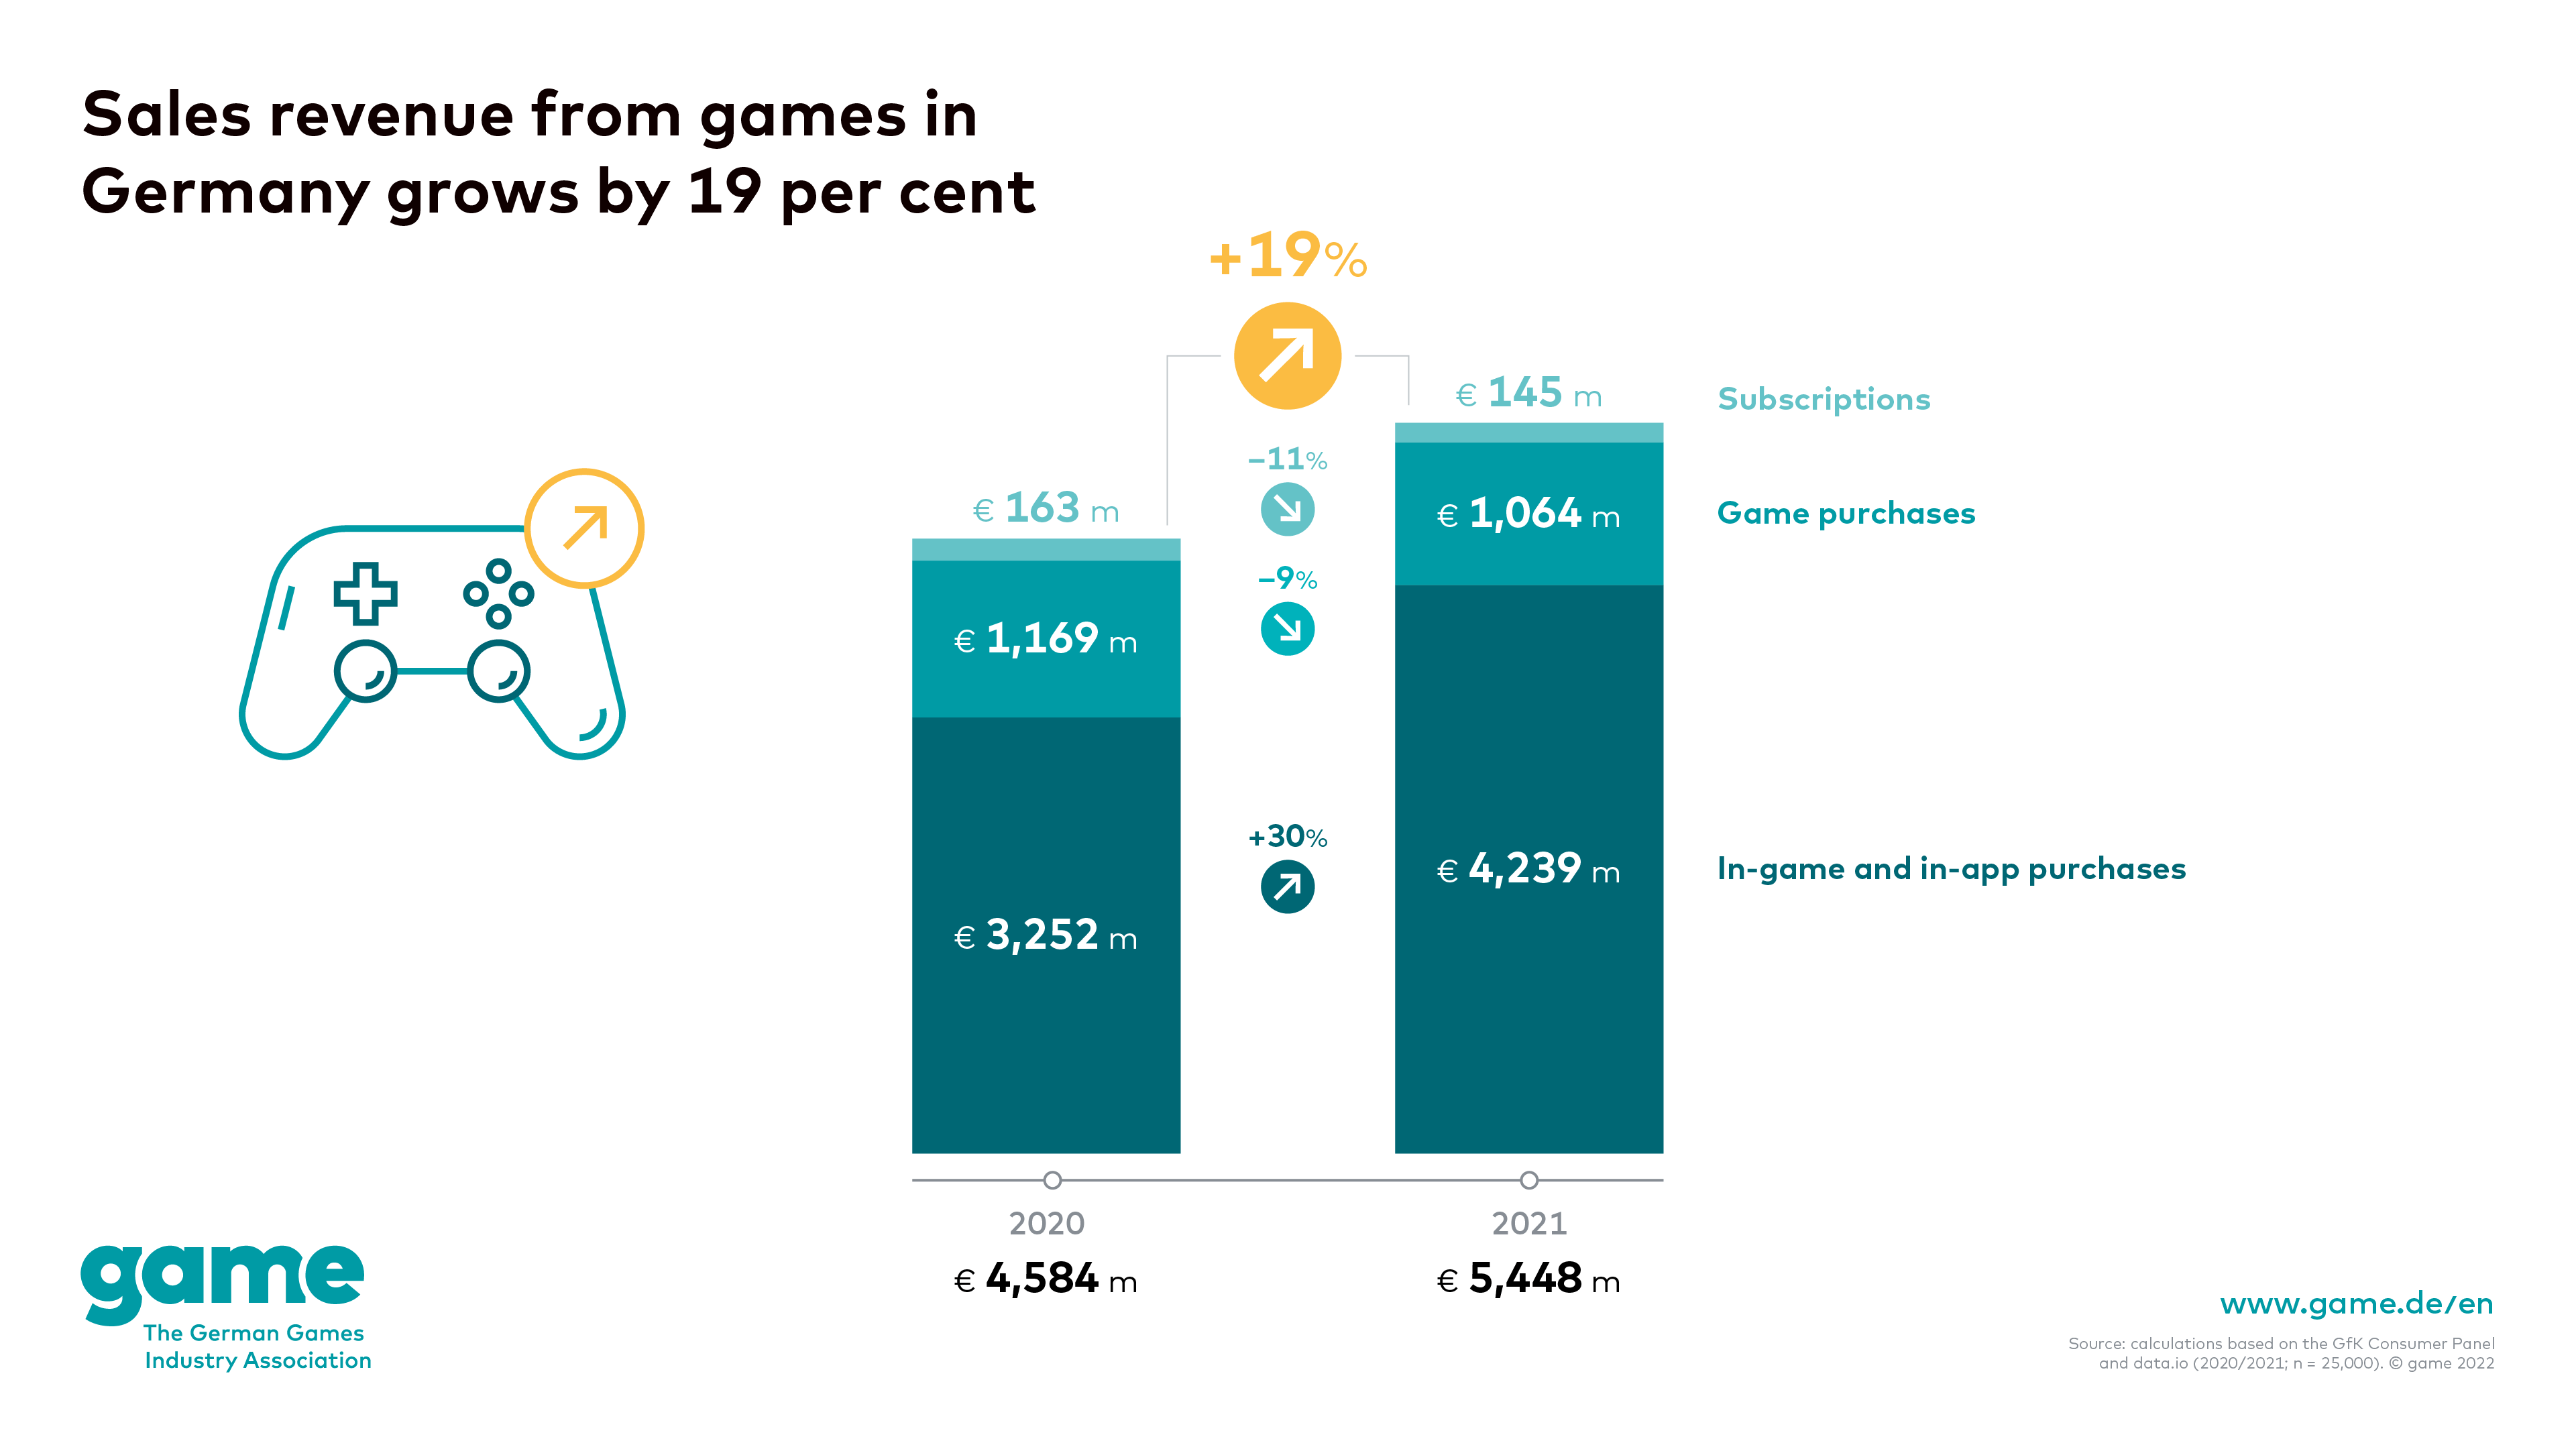 Sales revenue from games in Germany grows by 19 per cent